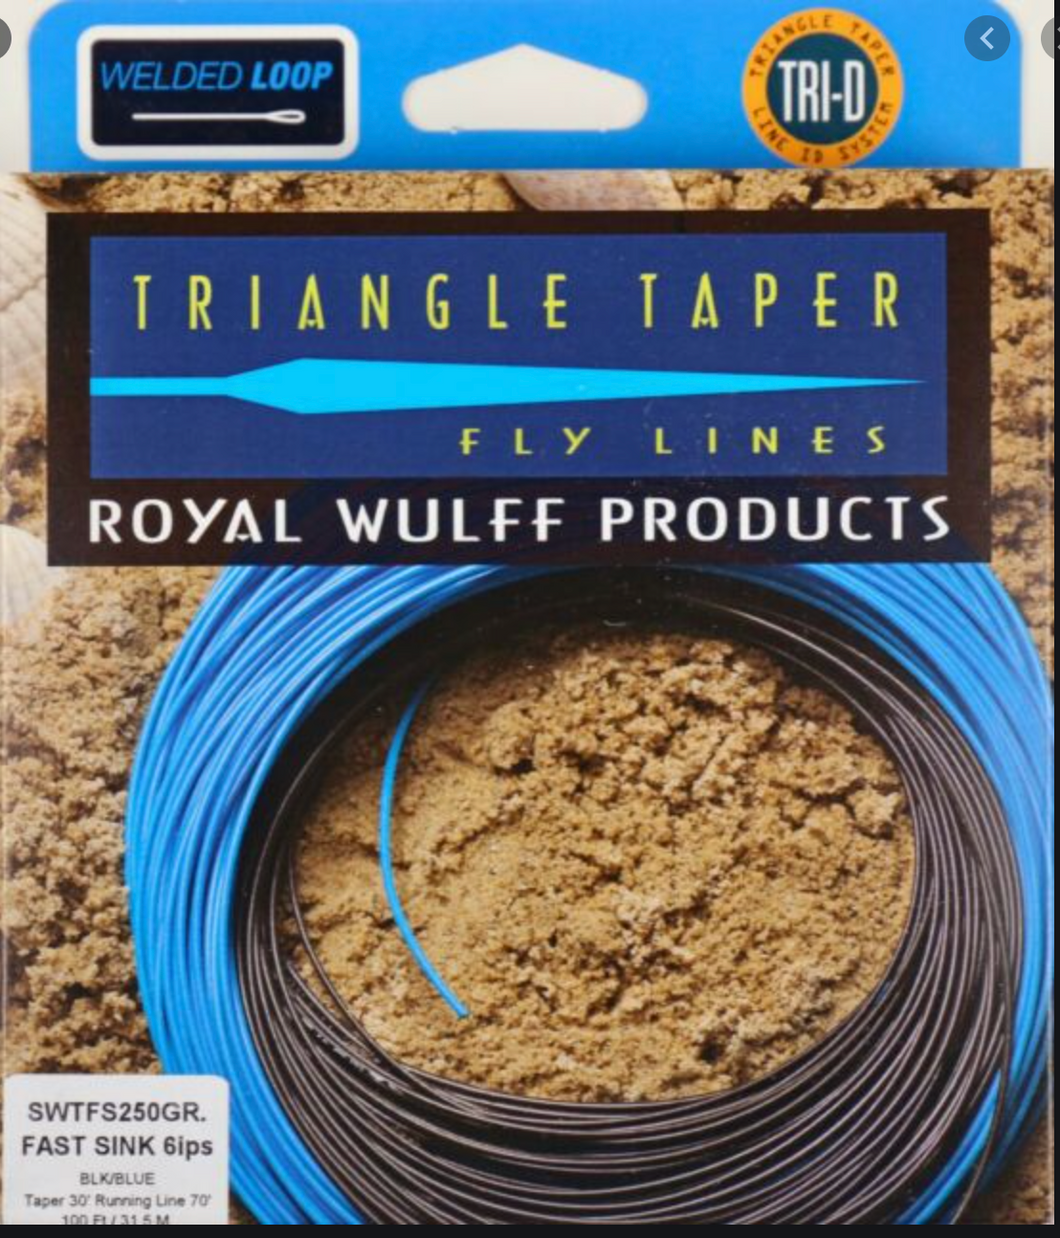 Royal Wulff Saltwater Triangle Taper Fly Lines